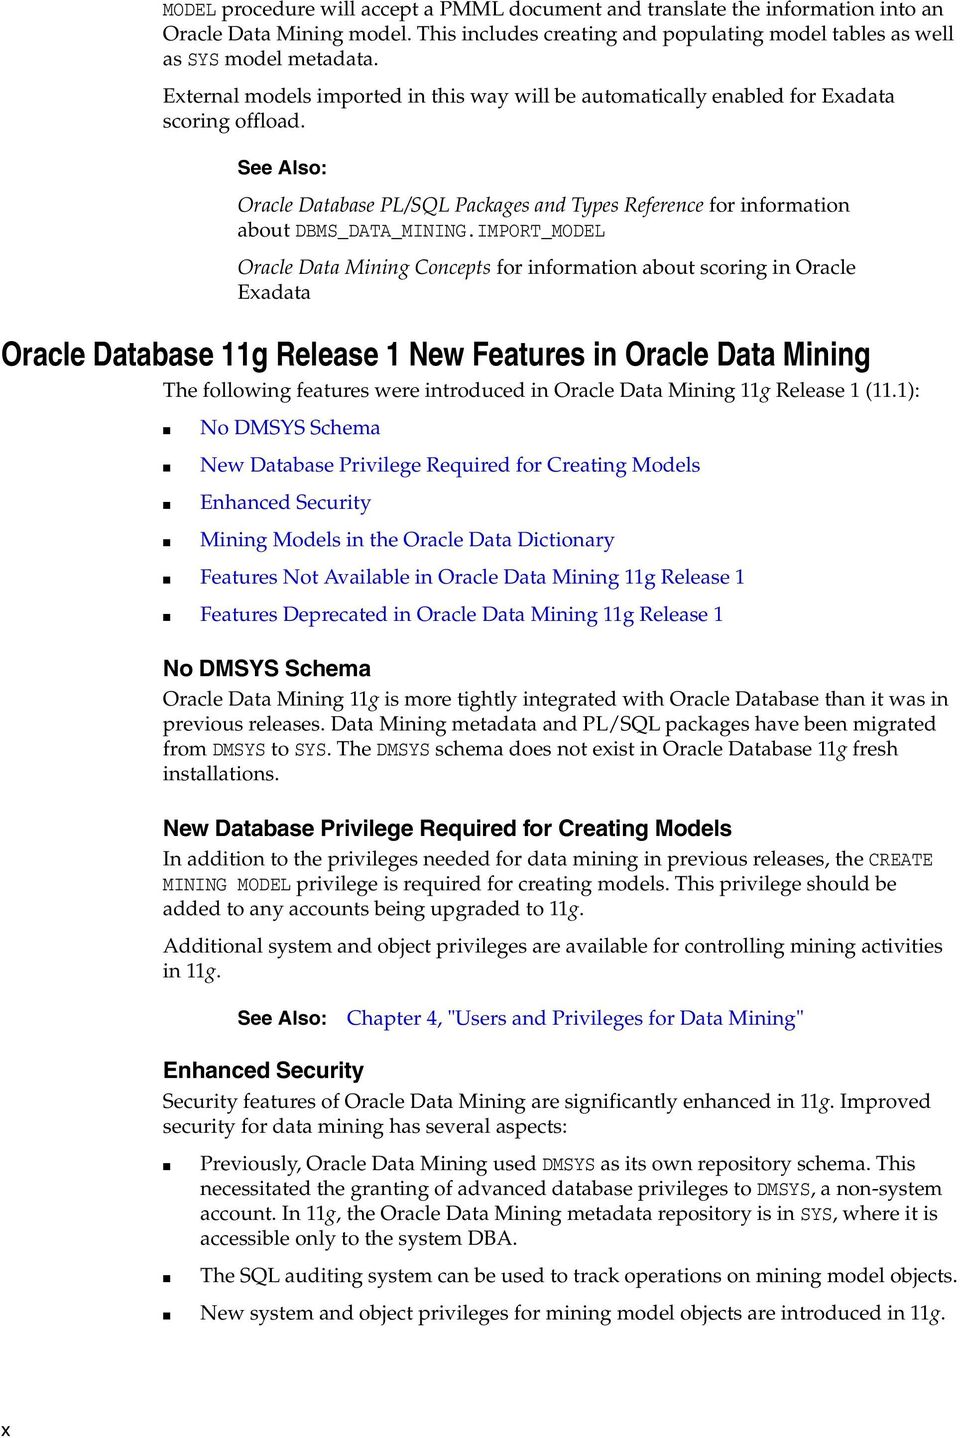 Oracle Database 11g Release 1 New Features in Oracle Data Mining The following features were introduced in Oracle Data Mining 11g Release 1 (11.